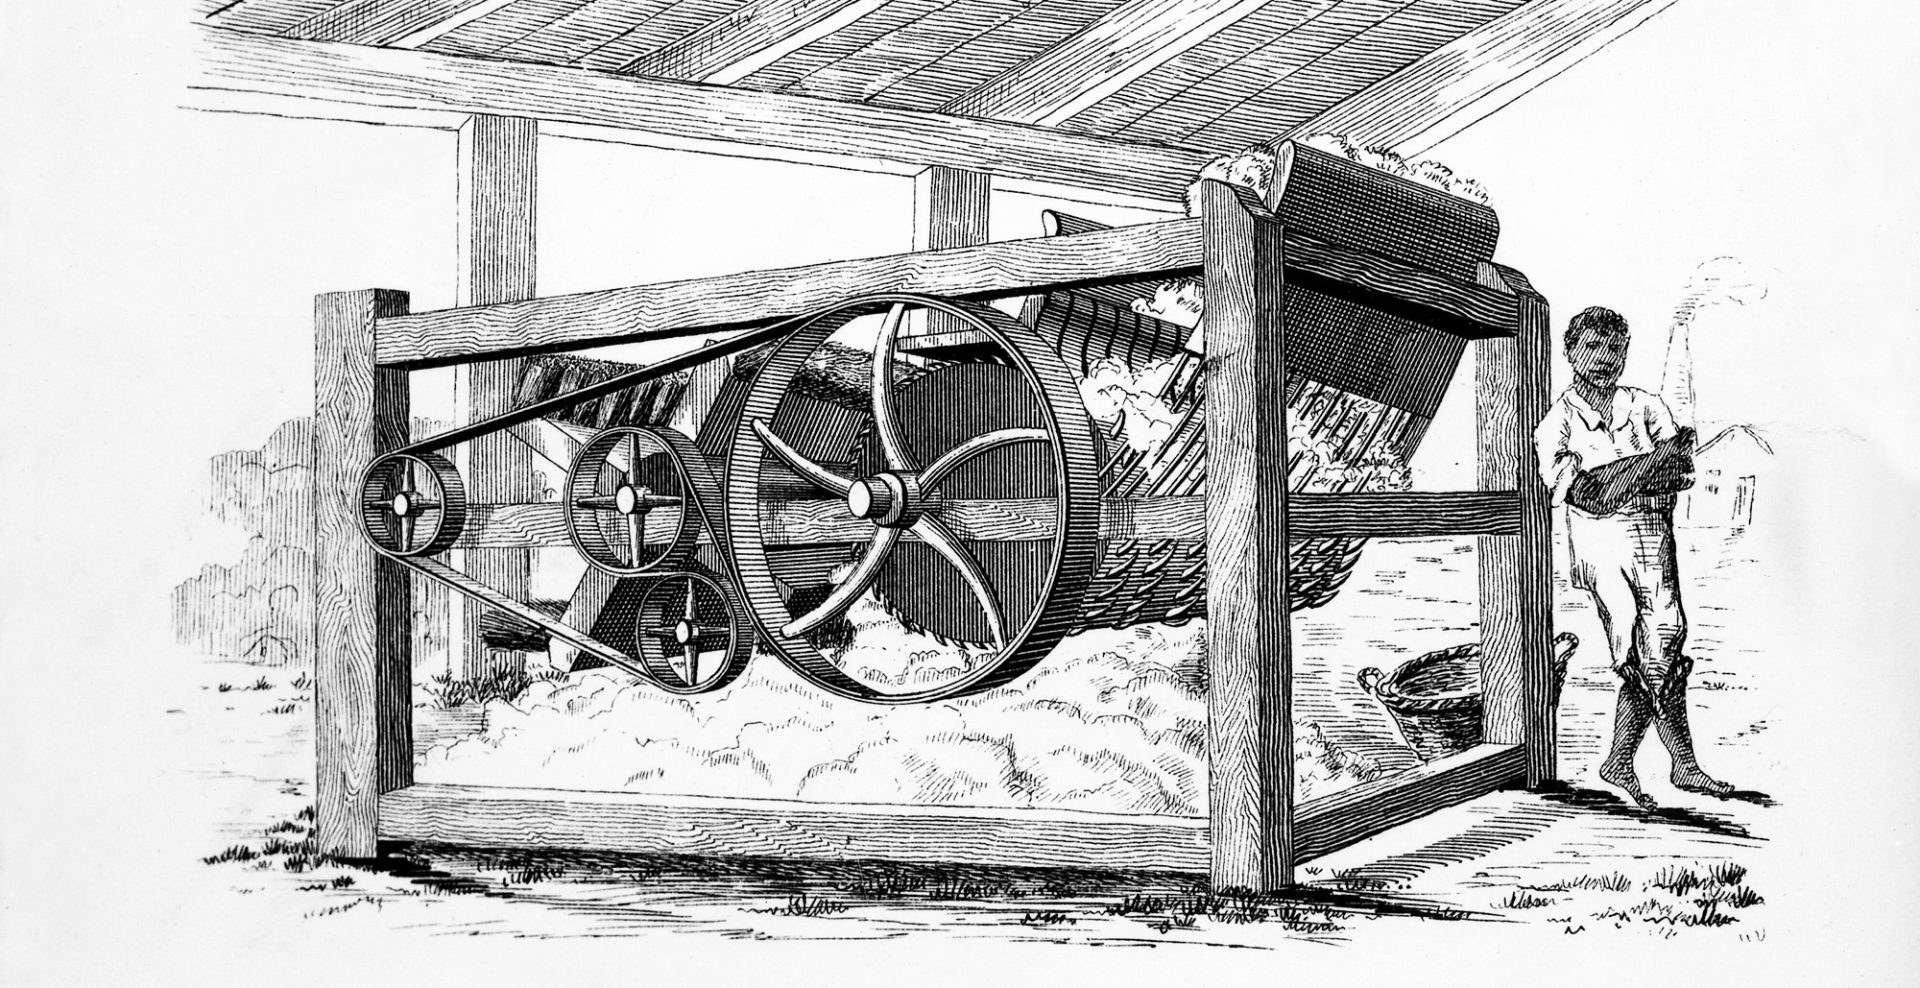 cotton gin on slaves before civil war